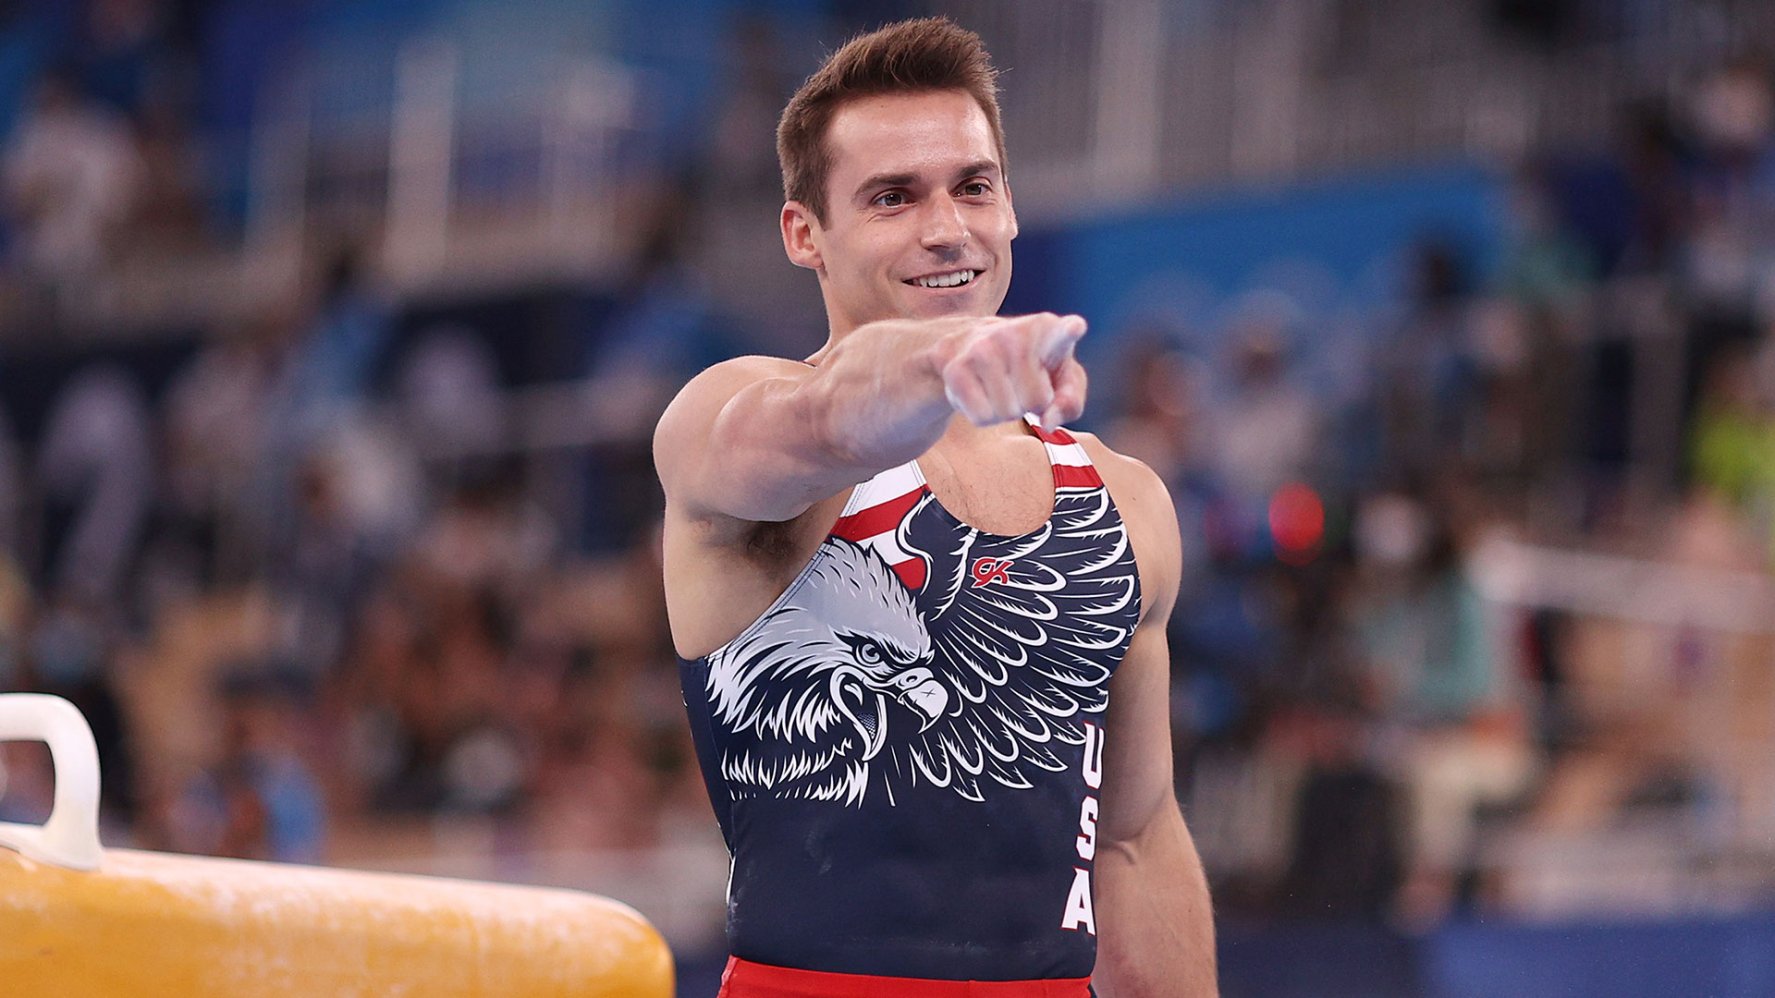 U.S. Finishes Fifth in Men’s Gymnastics Team Final for Third Straight